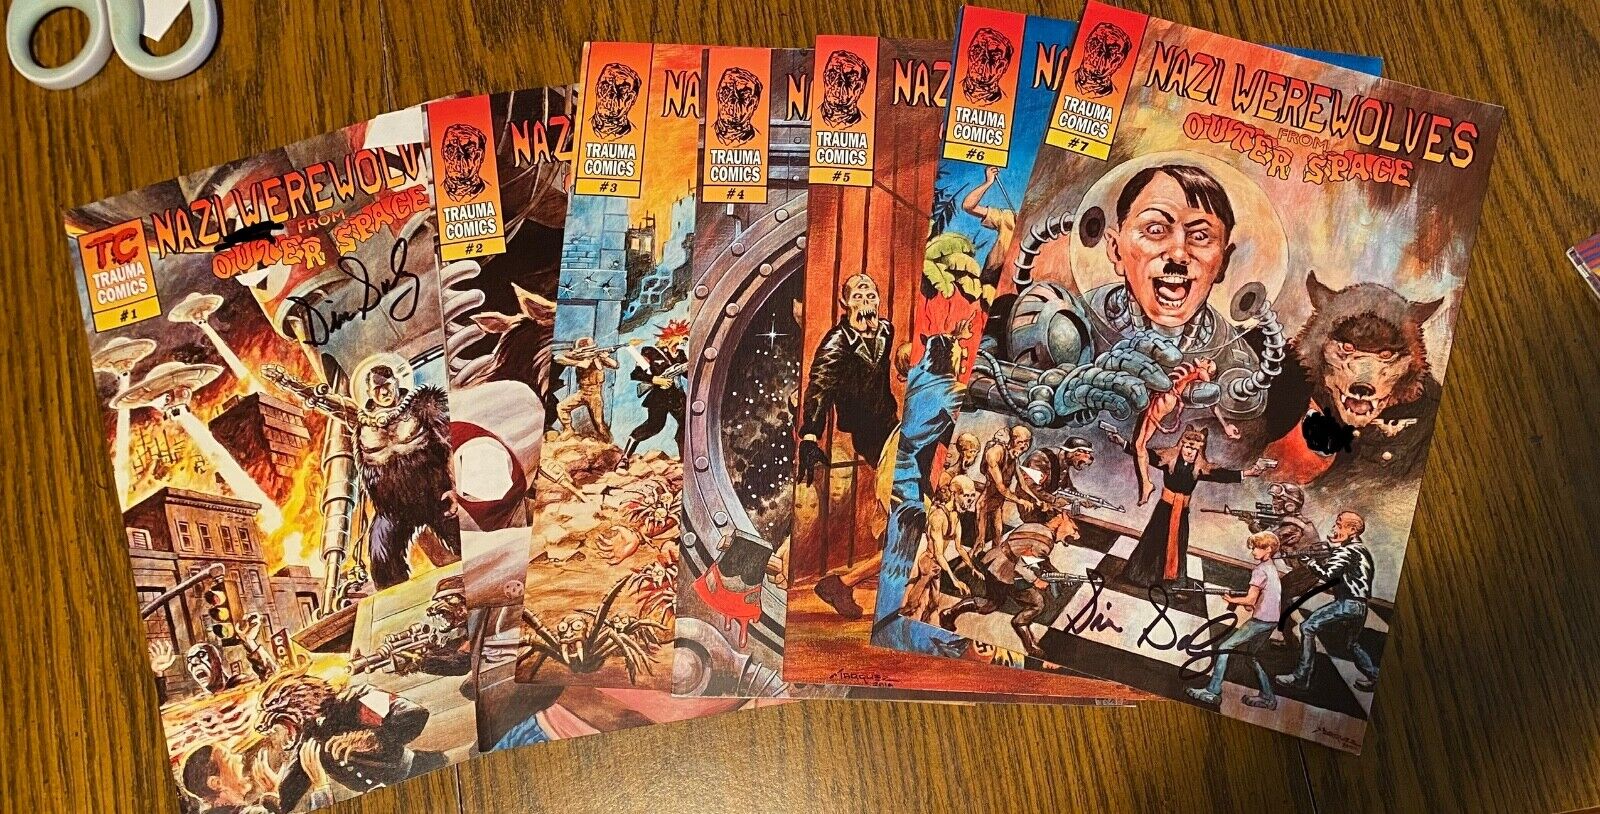 Nazi Werewolves from Outer Space #1-7  Group. Signed bythe creator/writer.